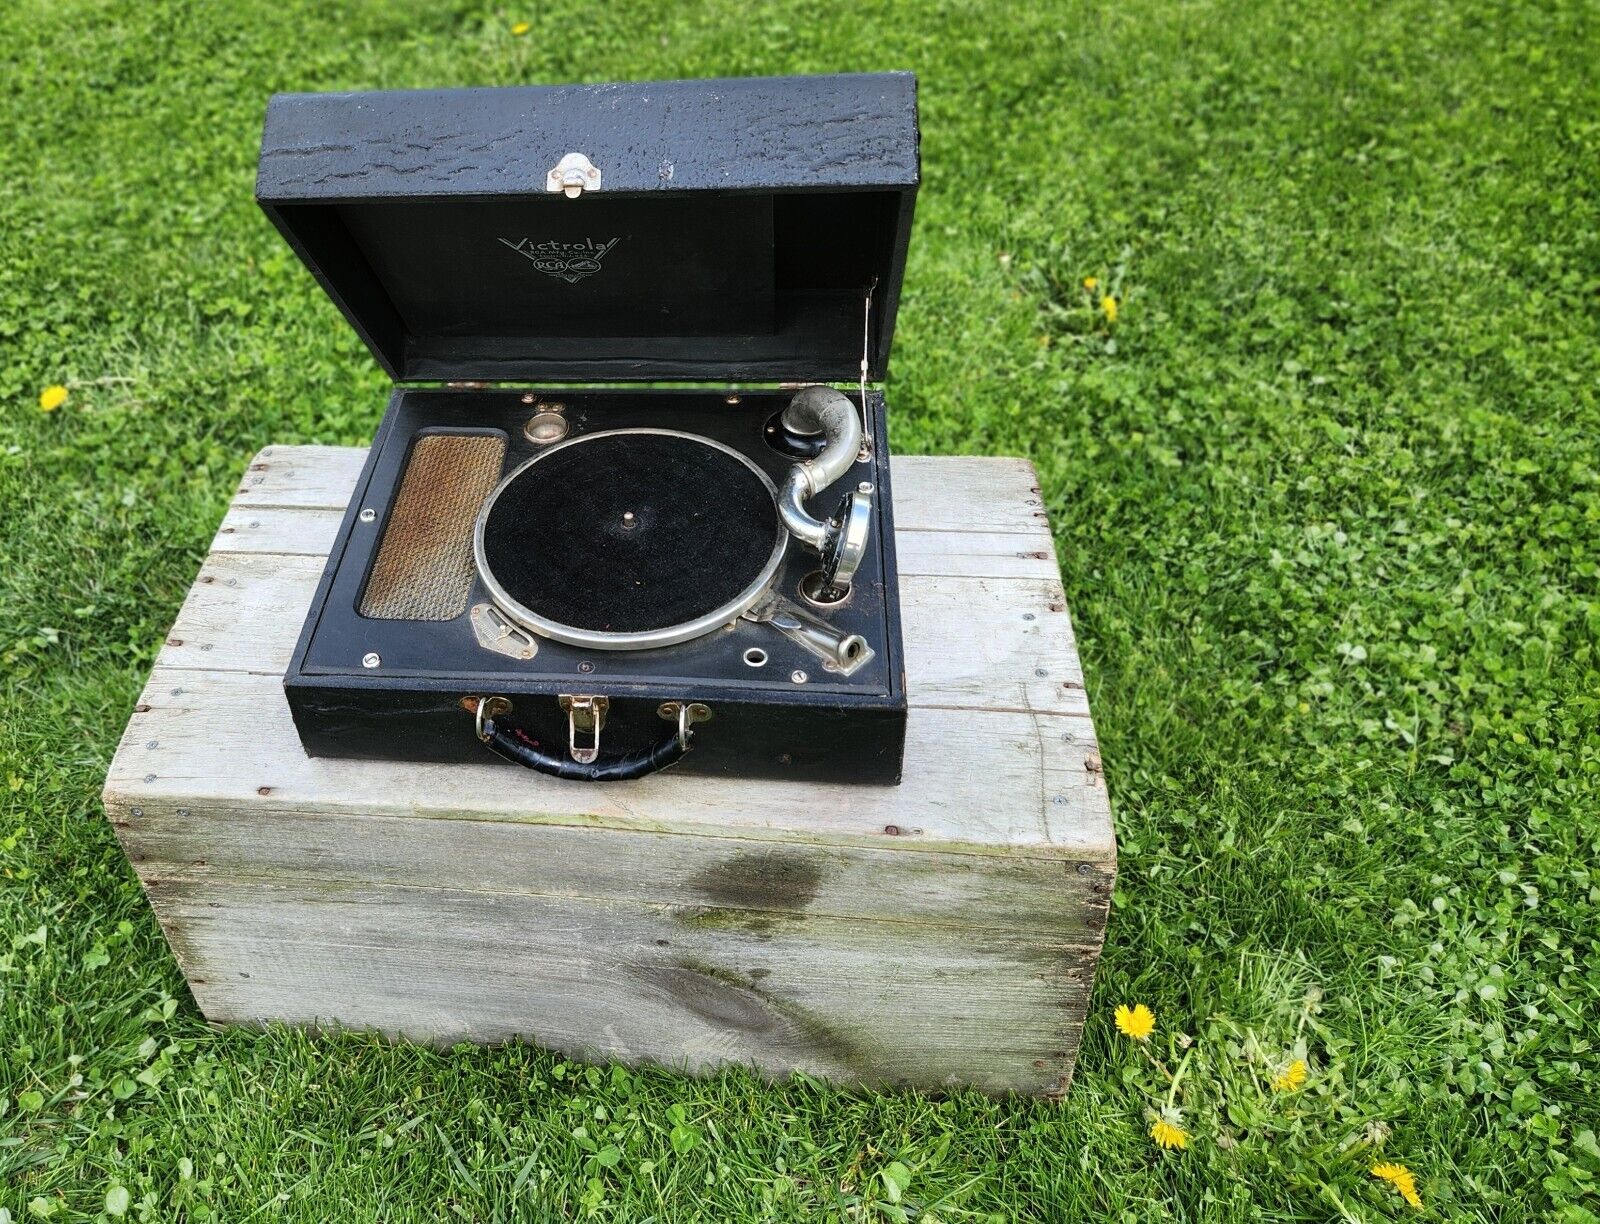 RCA Victor Model 2 Portable Suitcase Phonograph